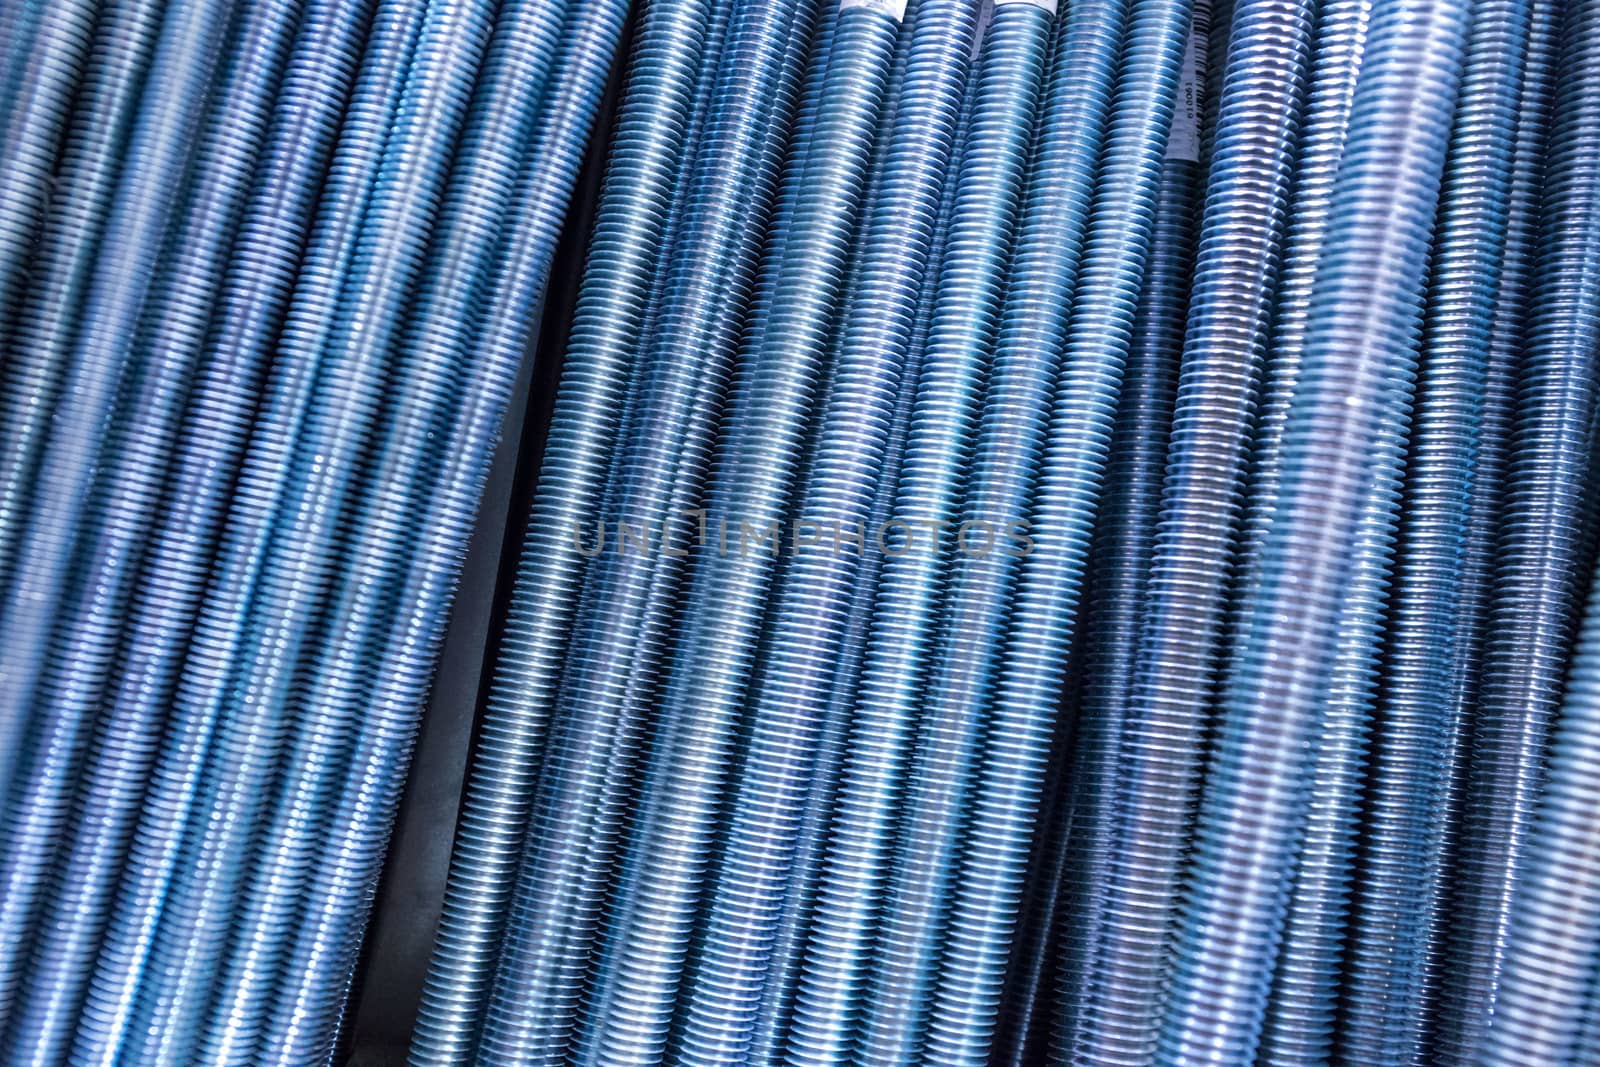 threaded metal rods. technological background or texture. A number of threaded steel rods, may be used as background